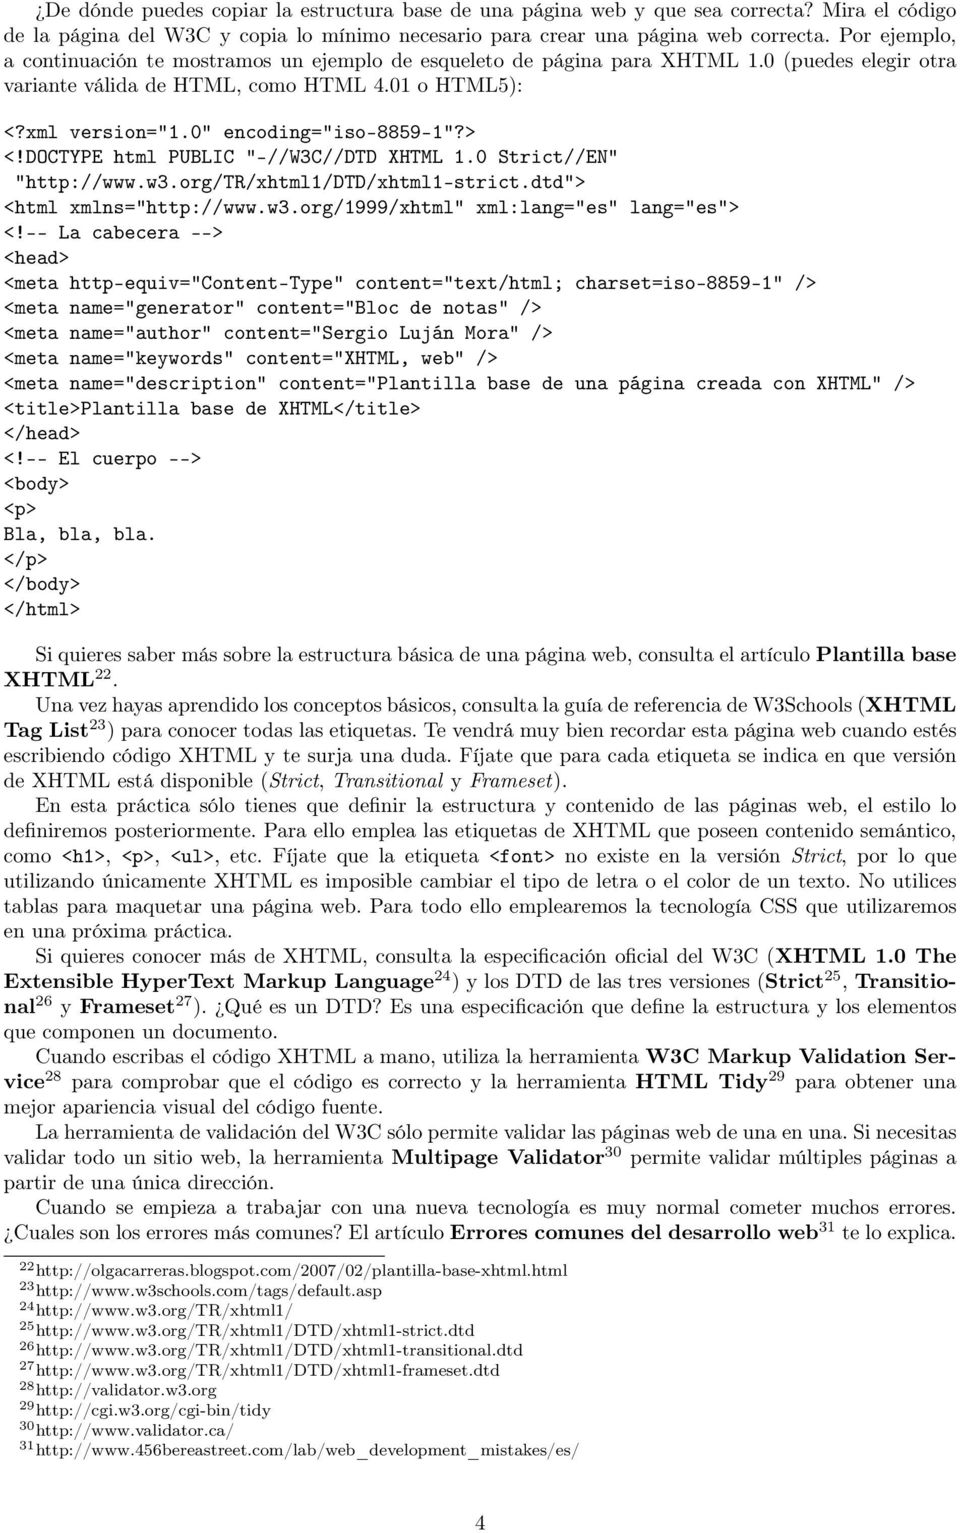 0" encoding="iso-8859-1"?> <!DOCTYPE html PUBLIC "-//W3C//DTD XHTML 1.0 Strict//EN" "http://www.w3.org/tr/xhtml1/dtd/xhtml1-strict.dtd"> <html xmlns="http://www.w3.org/1999/xhtml" xml:lang="es" lang="es"> <!